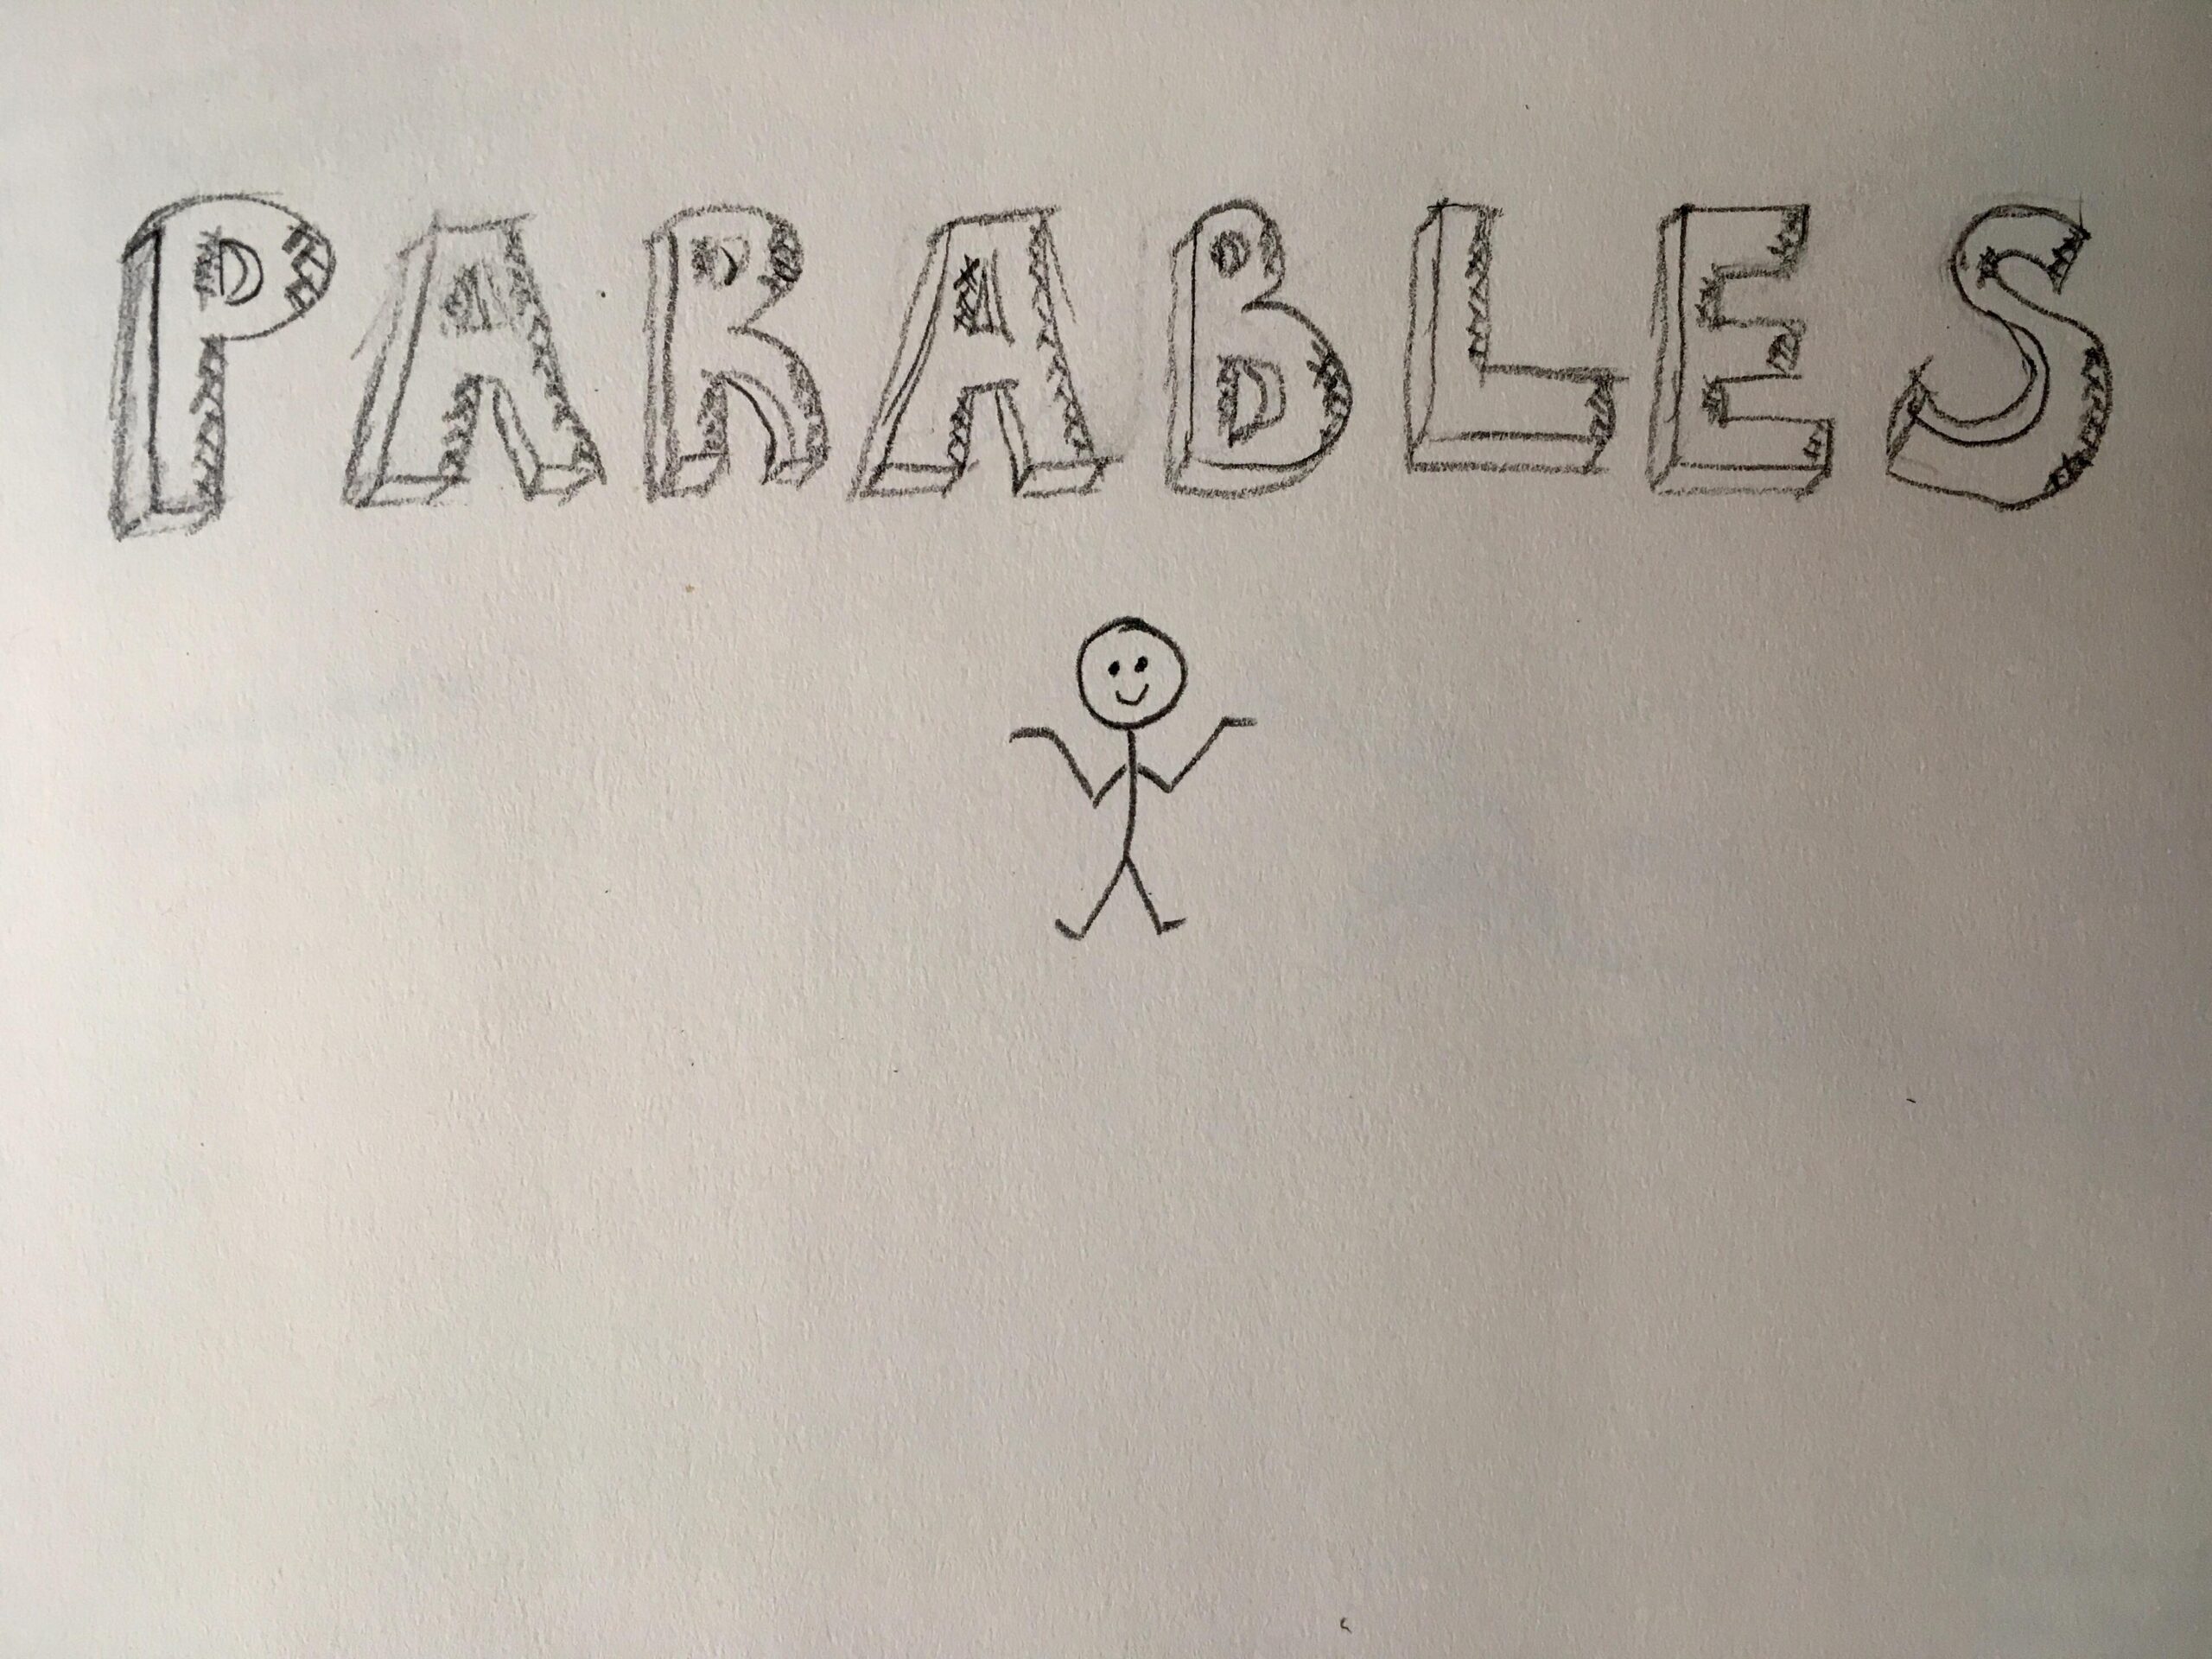 The Parables Project Introduction